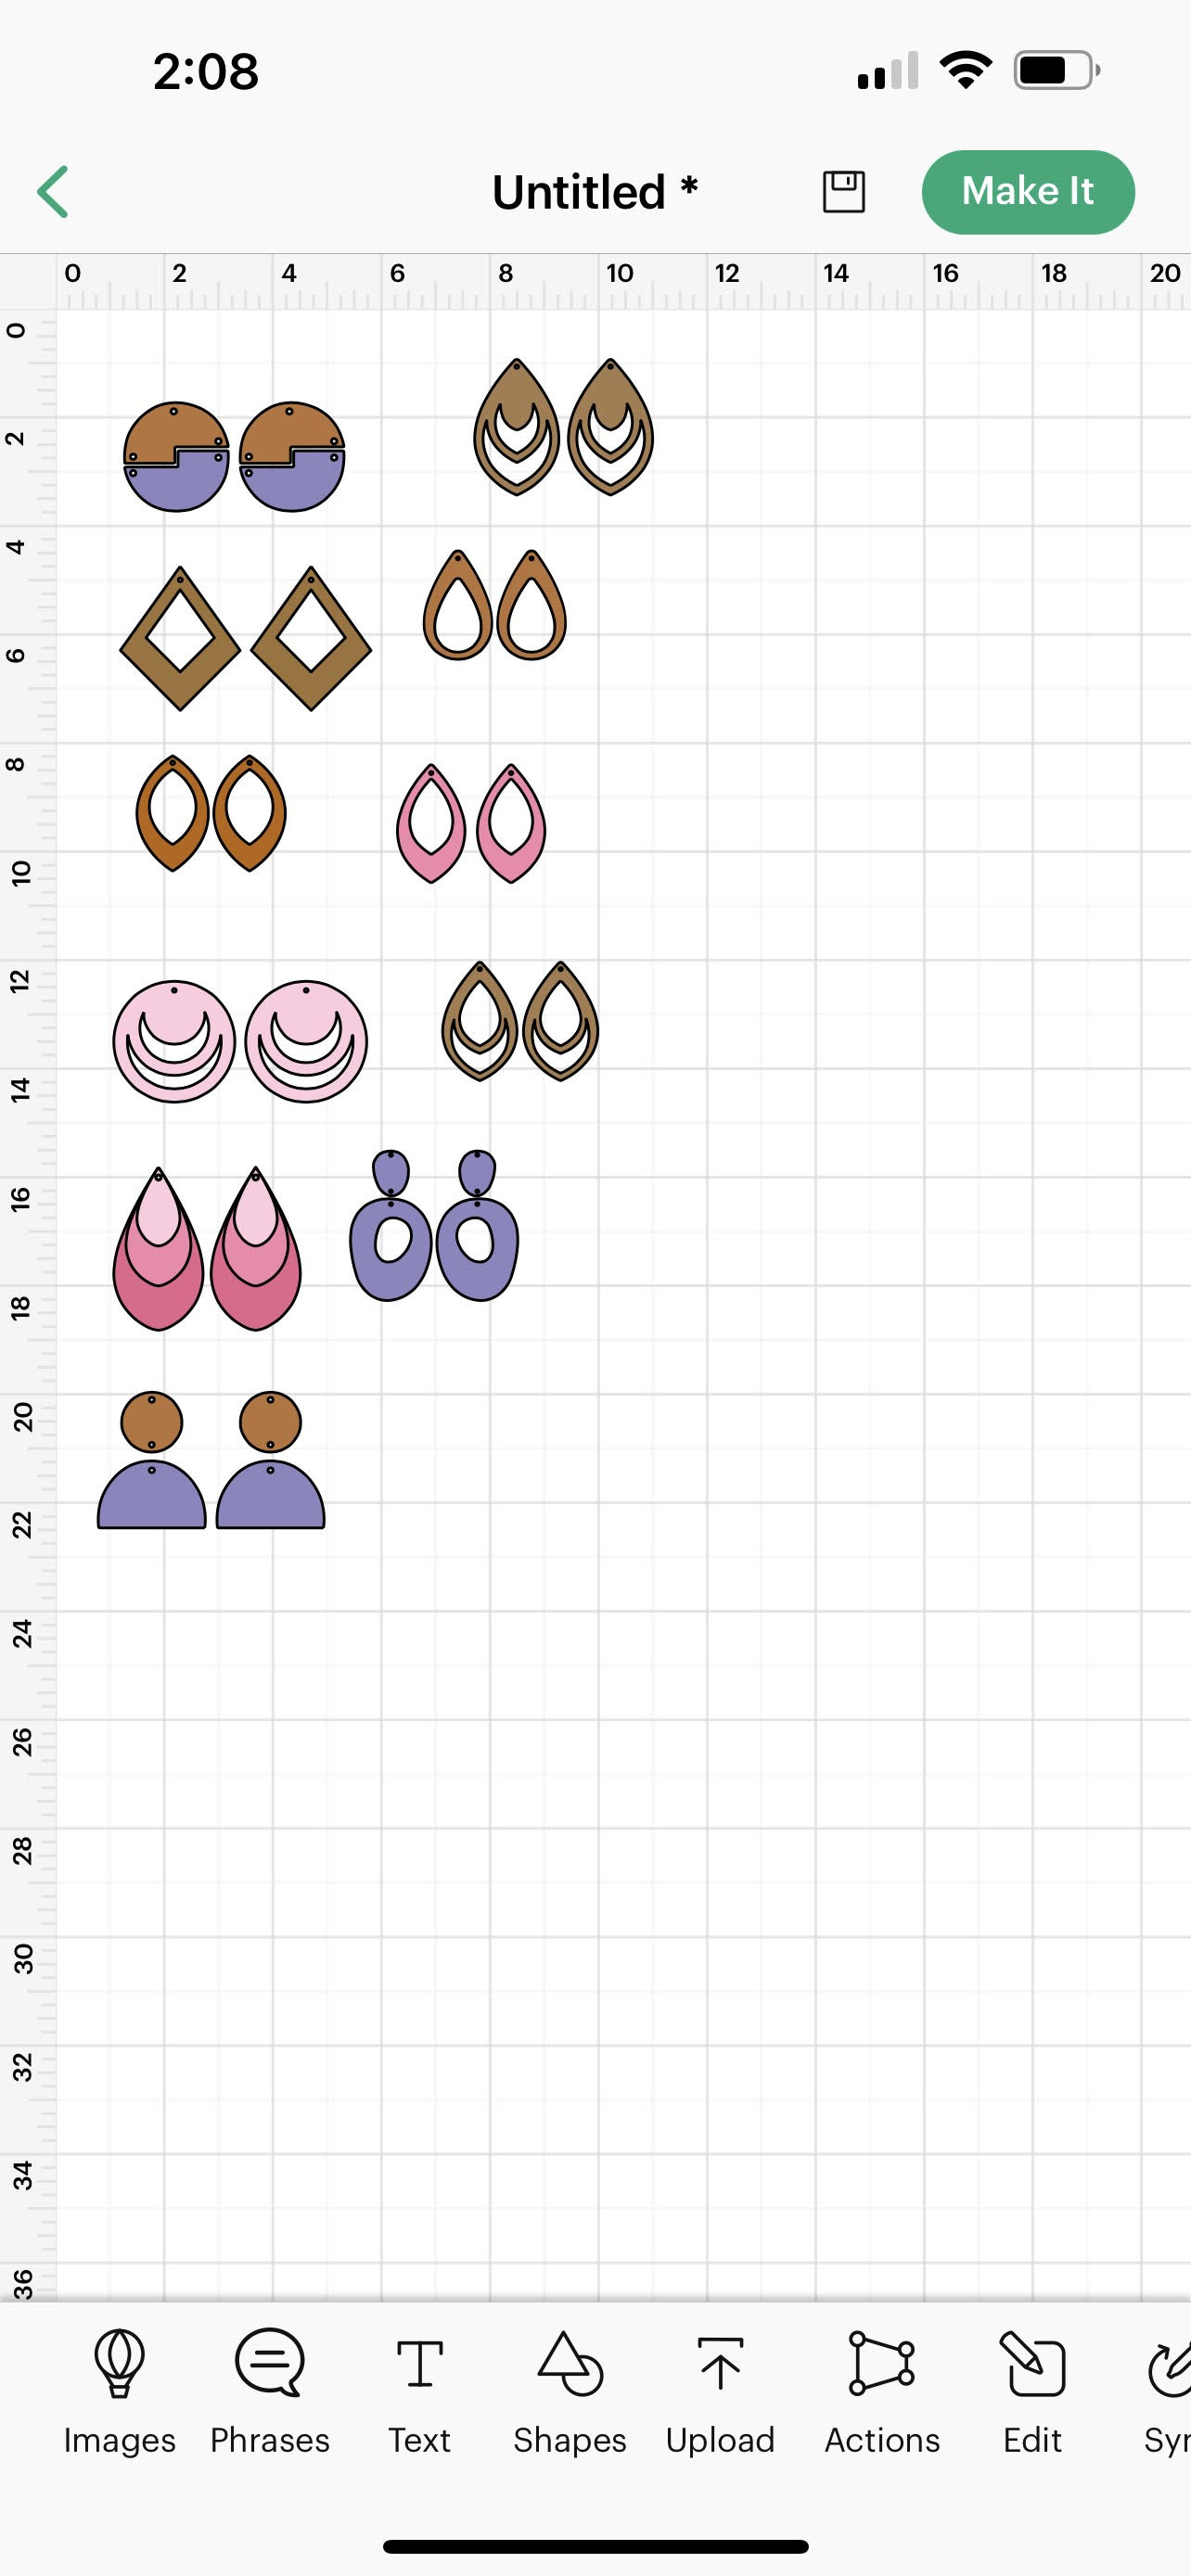 Image is a screenshot from Cricut Design Space showing cut files for 11 pairs of earrings on a canvas.